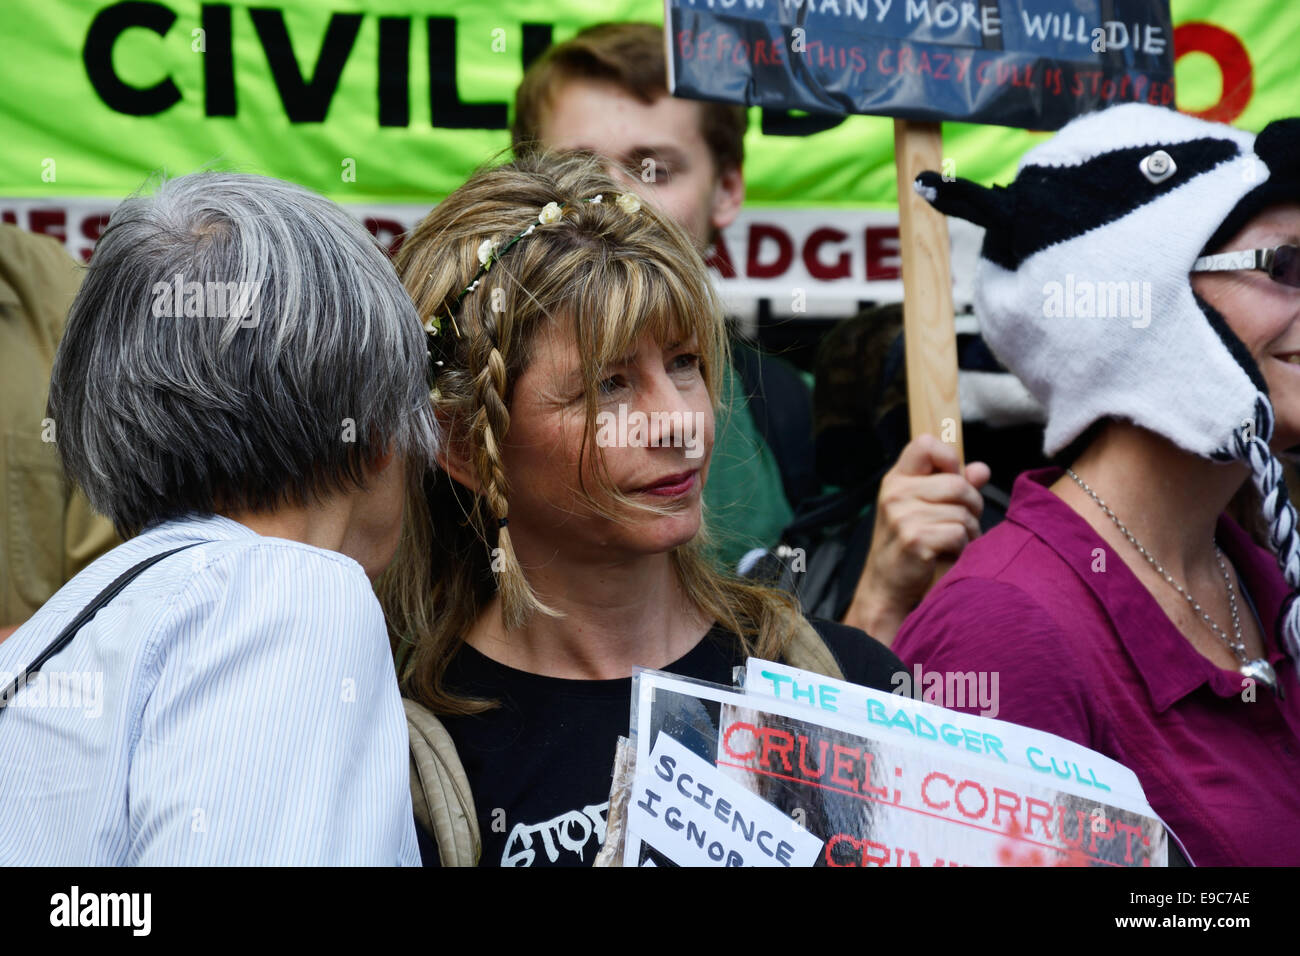 Badger Cull Protesters, London, England. Stock Photo